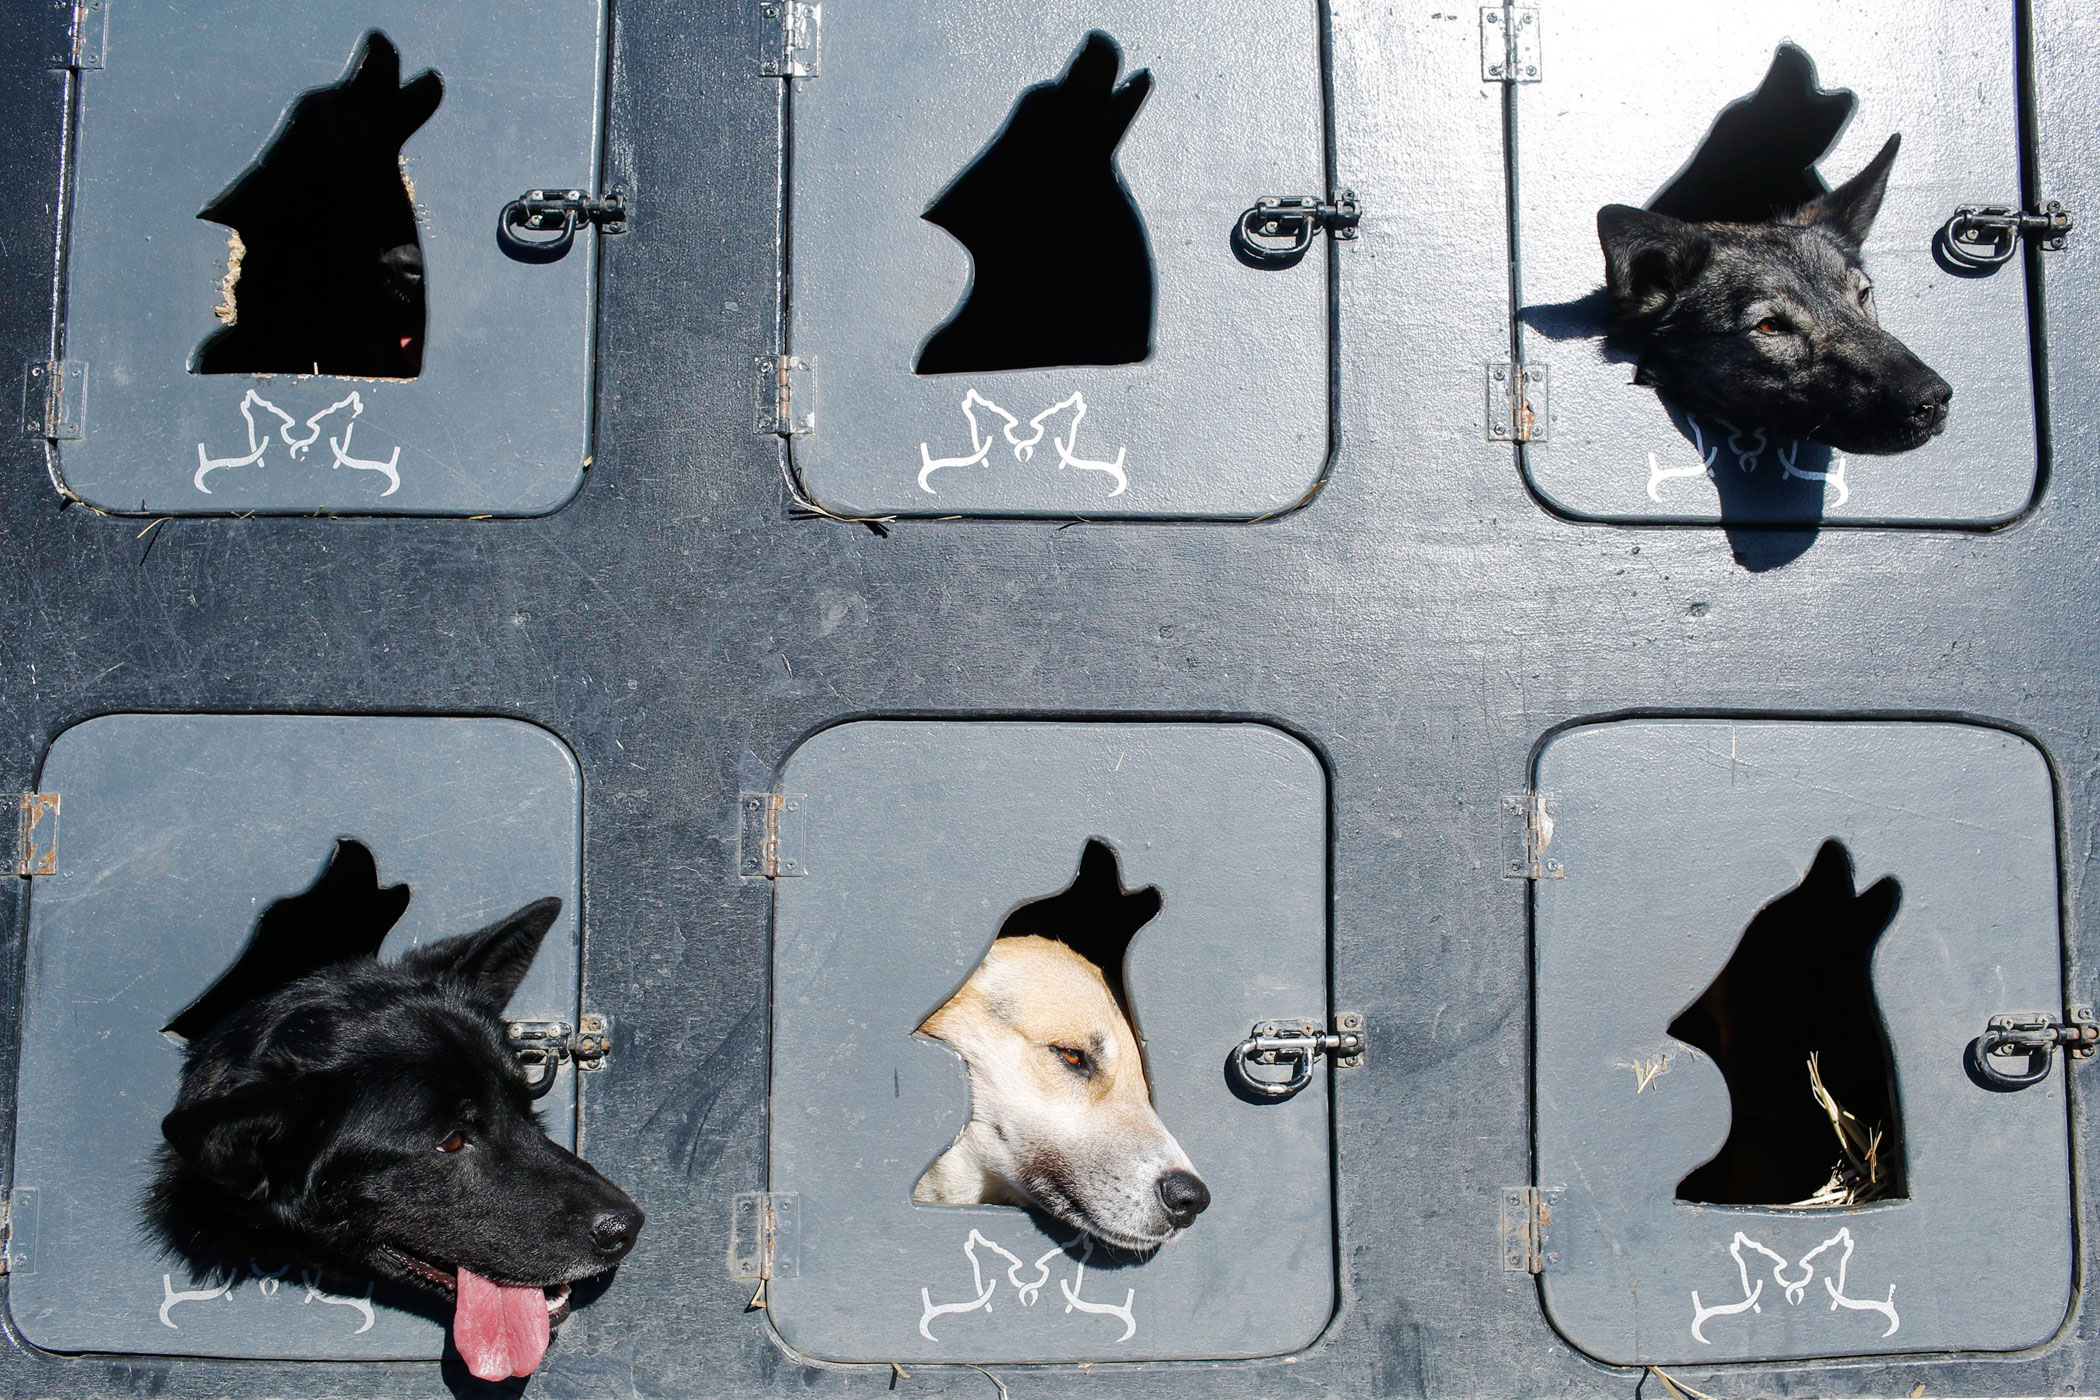 Musher Justin Savidis' dogs wait in the truck before the restart of the Iditarod Trail Sled Dog Race in Willow, Alaska on March 6.